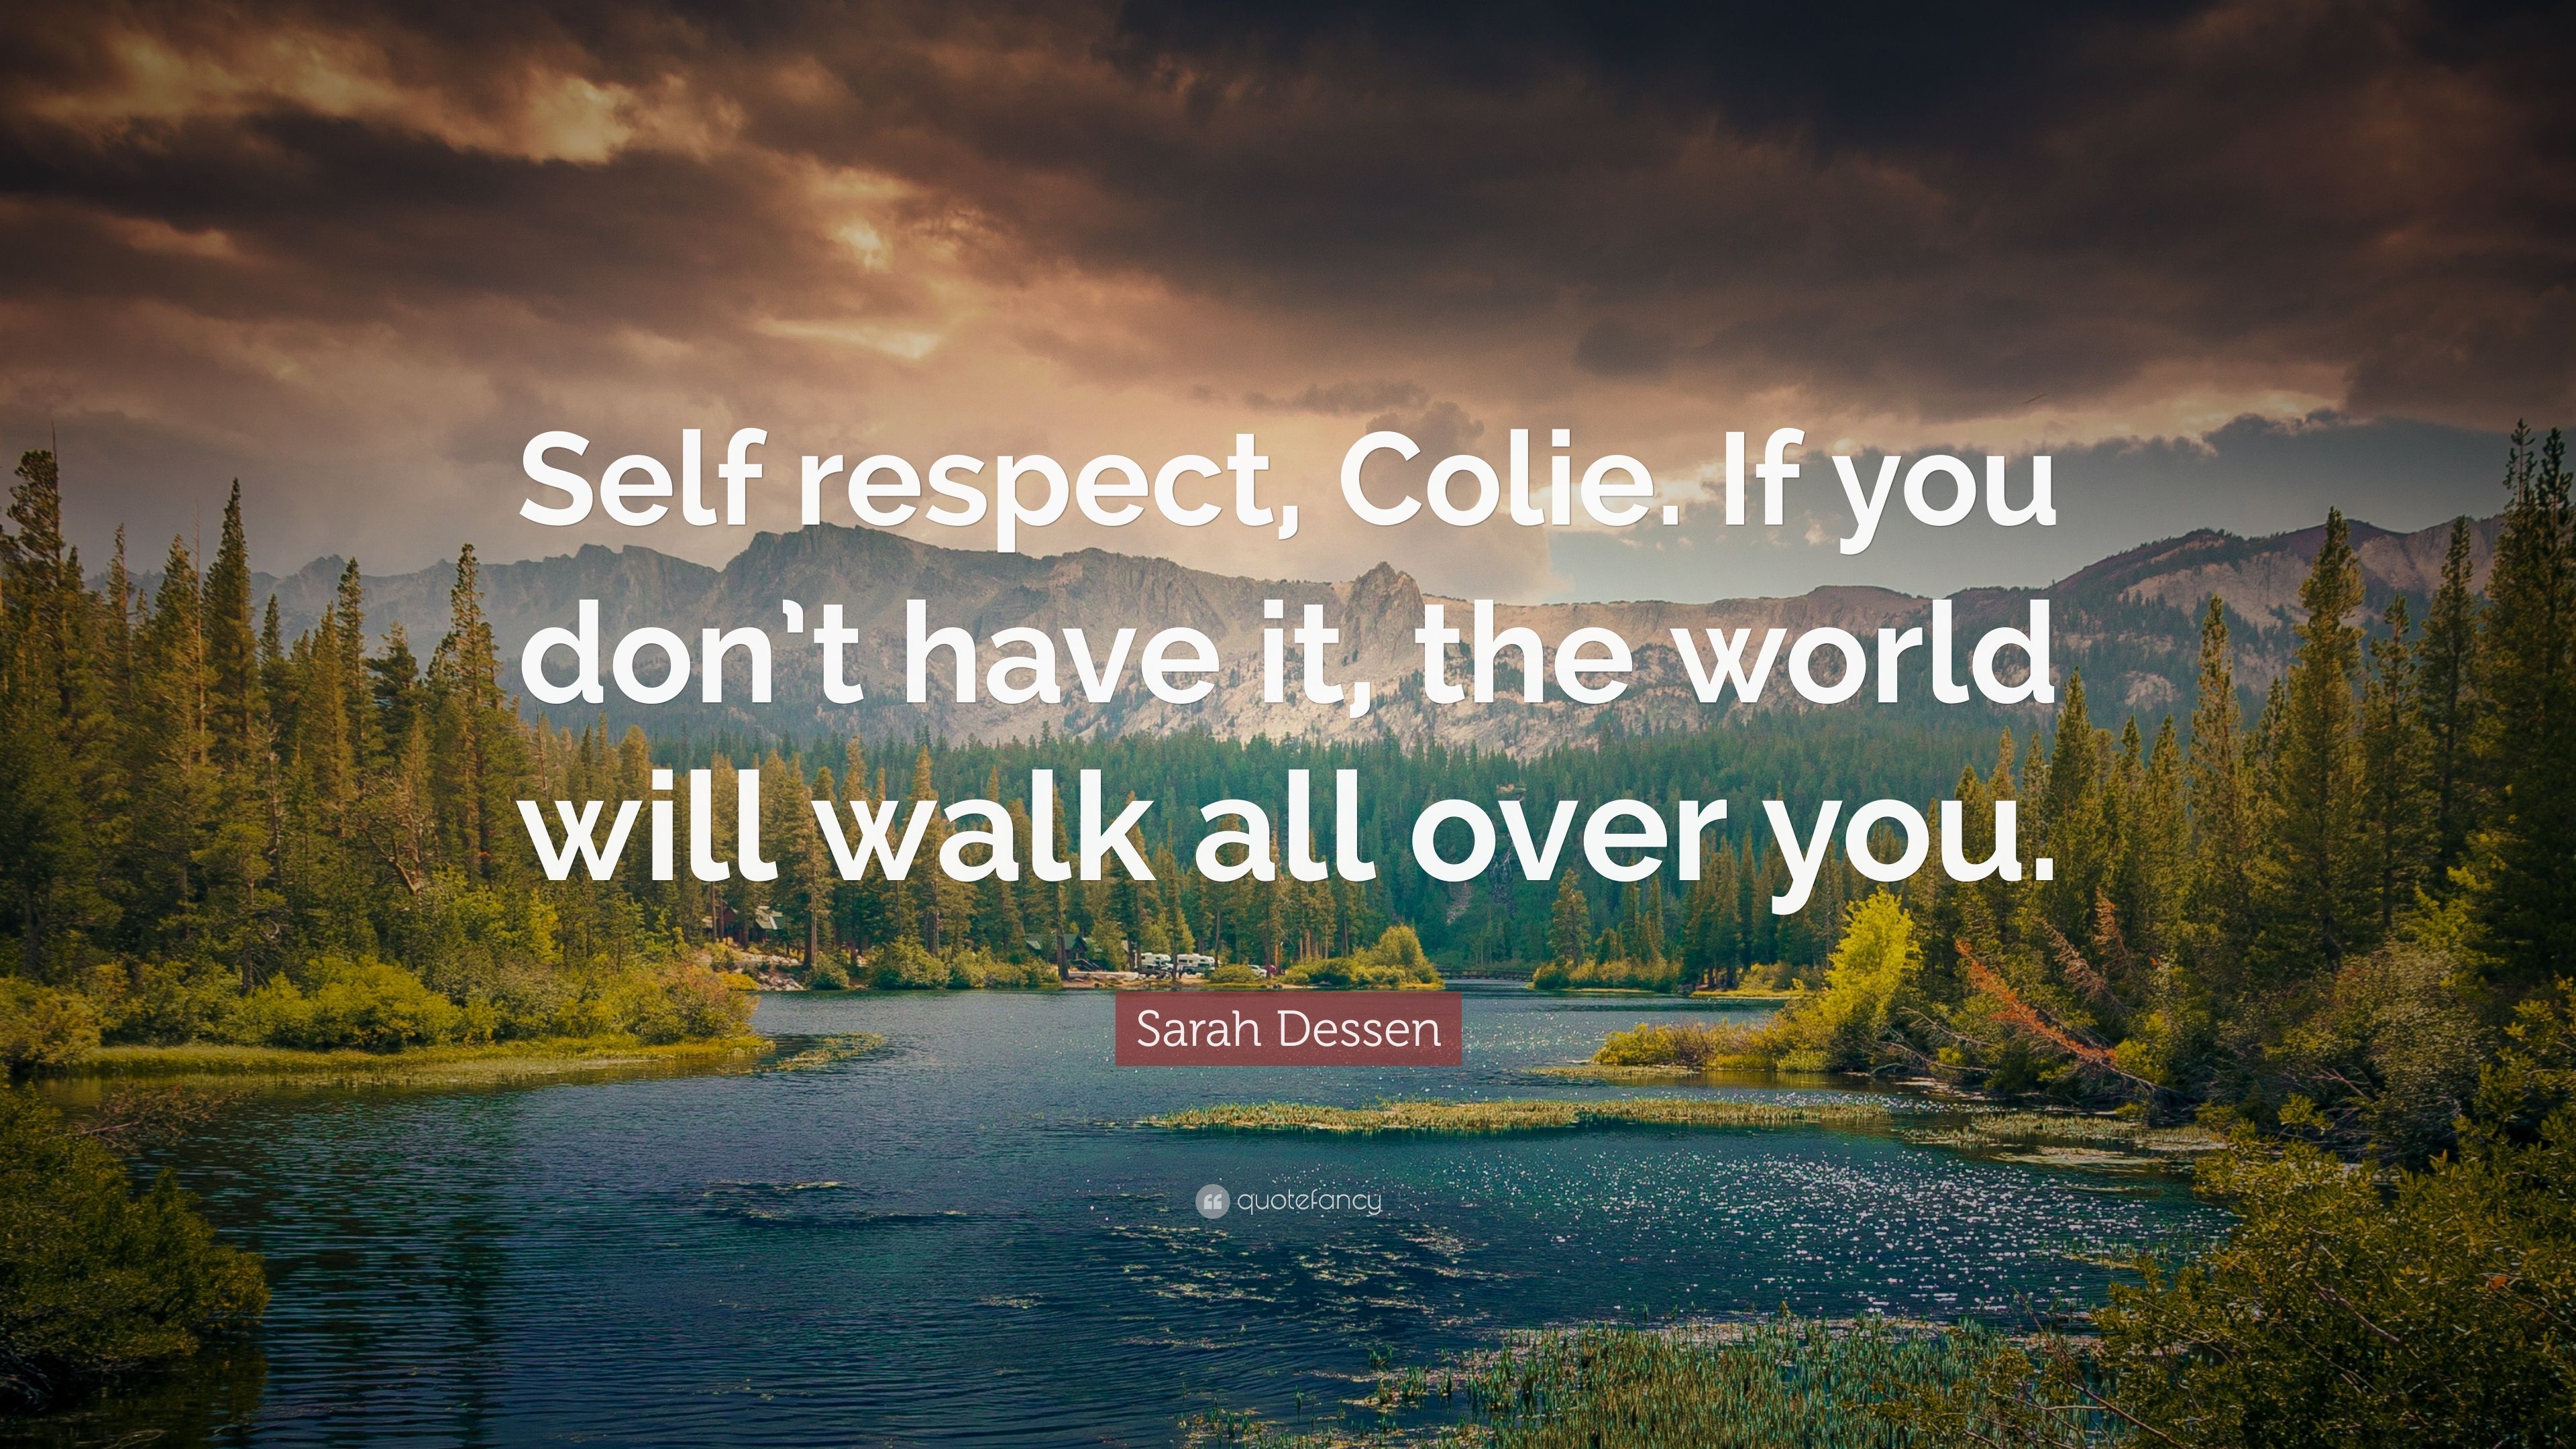 Sarah Dessen Quote: “Self respect, Colie. If you don't have it